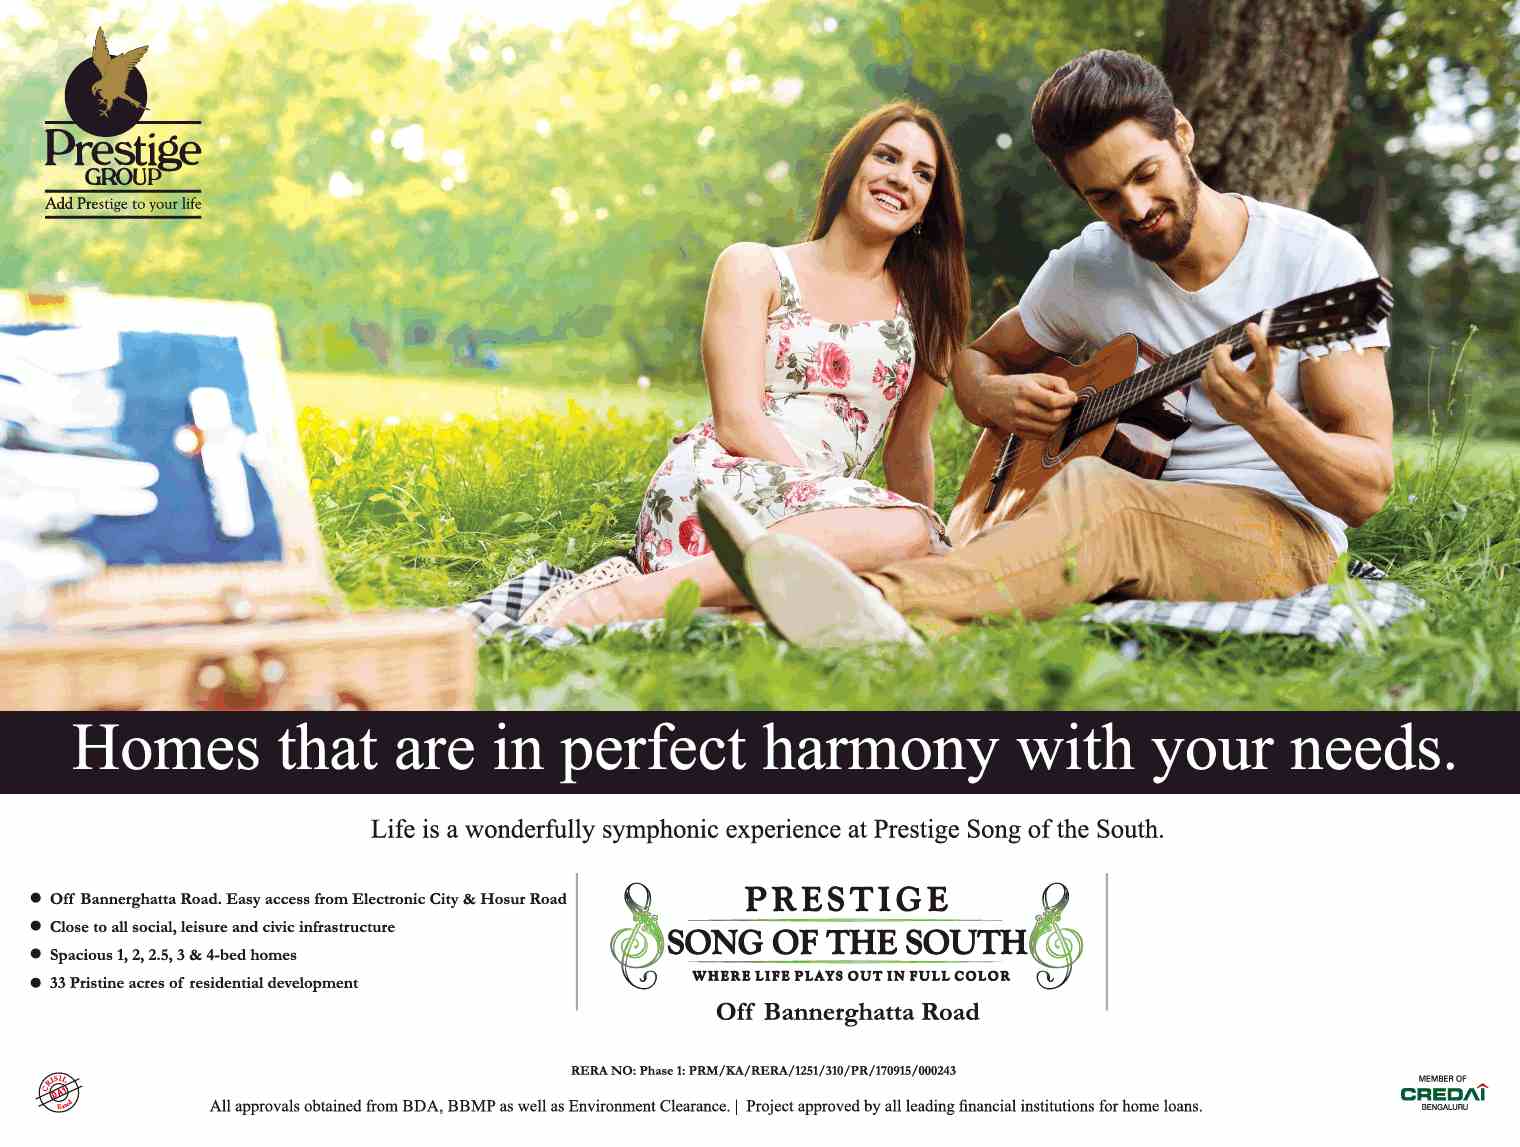 Book home that is in perfect harmony with your needs at Prestige Song Of The South, Bangalore Update